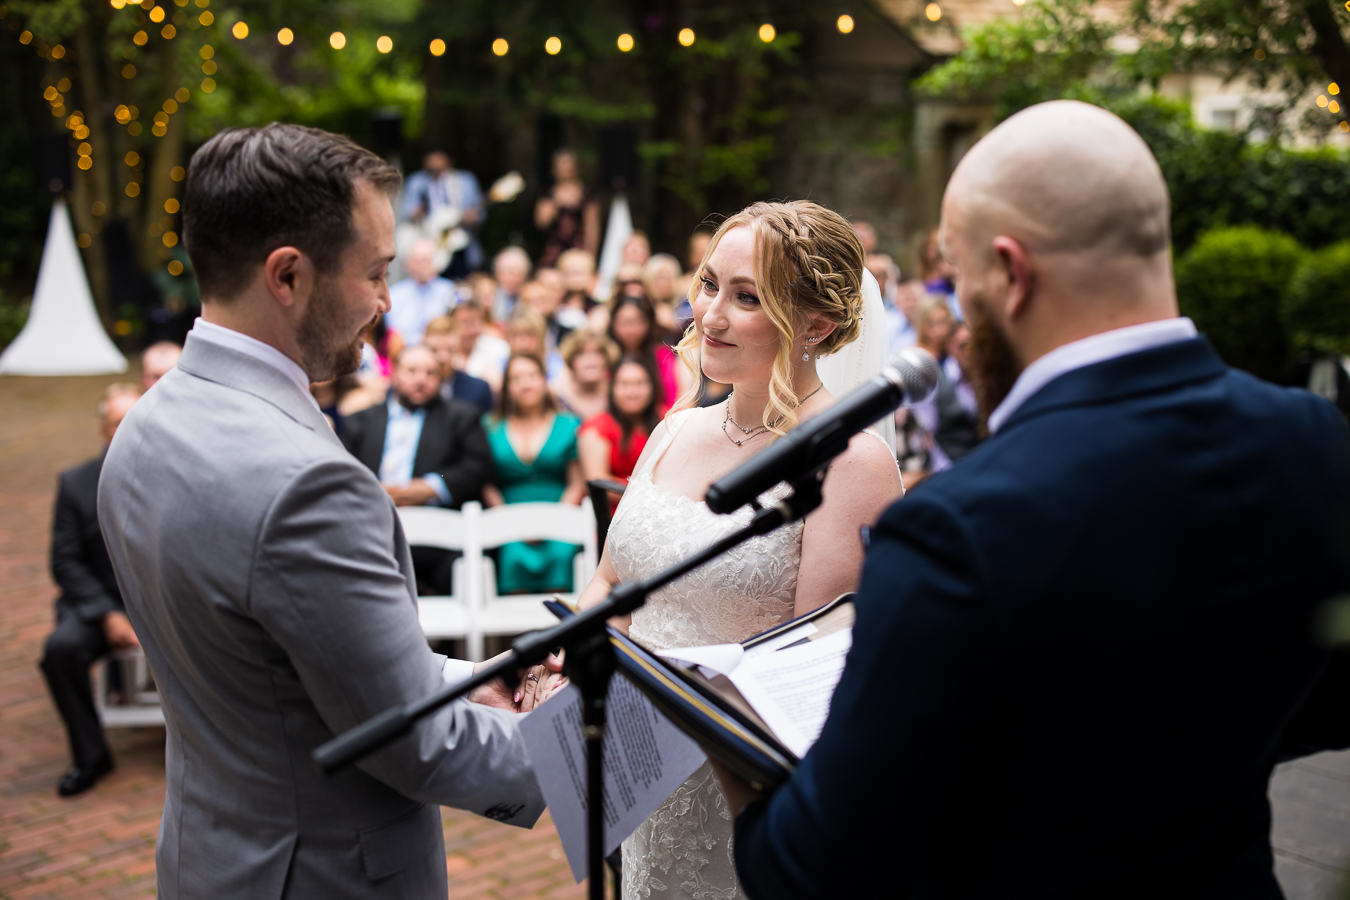 wedding photographer, lisa rhinehart, captures this image of the bride and the groom as they hold hands and smile at one another during their wedding ceremony at their venue in new hope, pa 